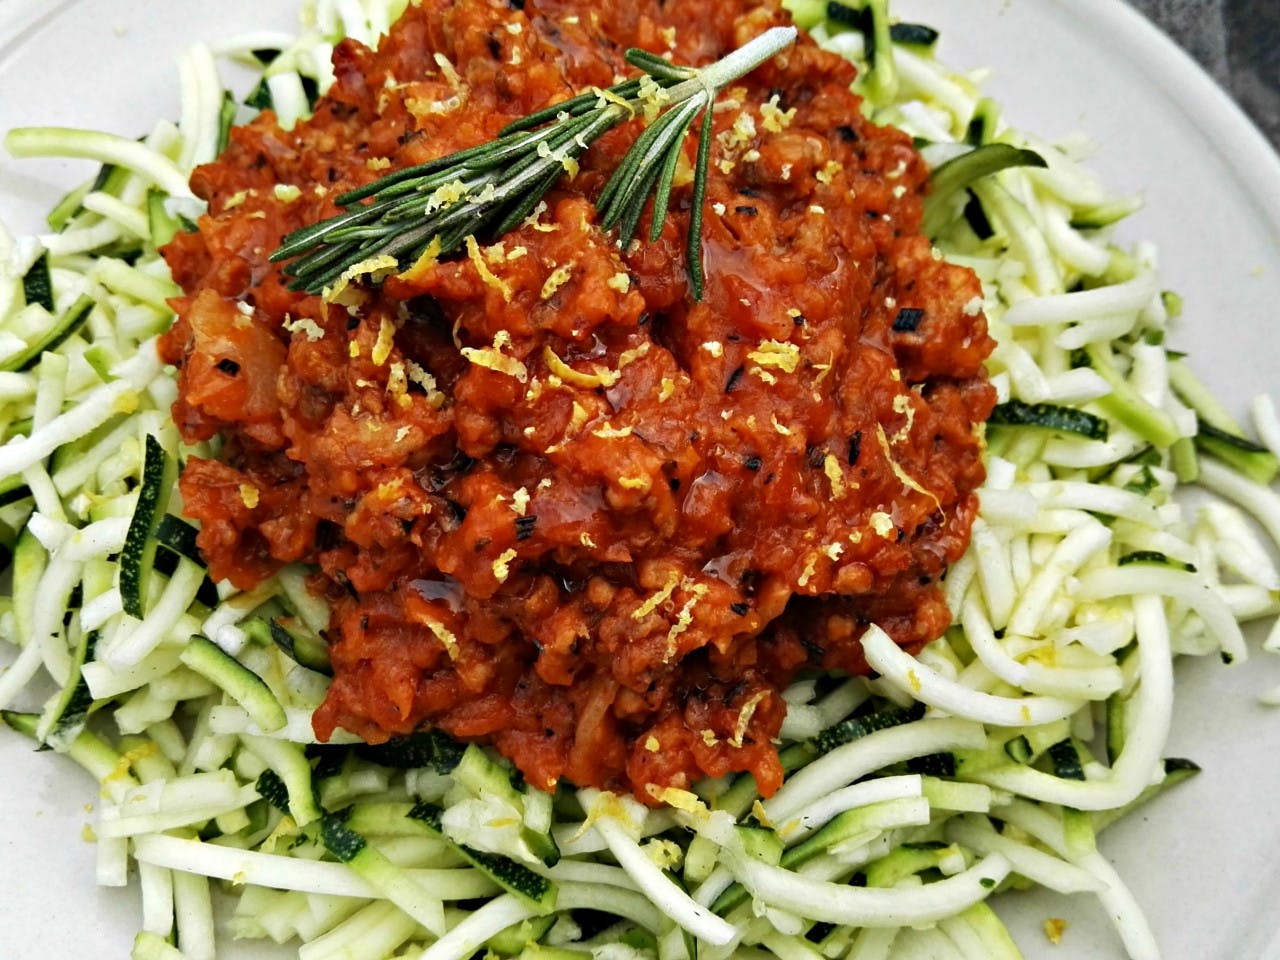 Courgetti Bolognese with rosemary and lemon